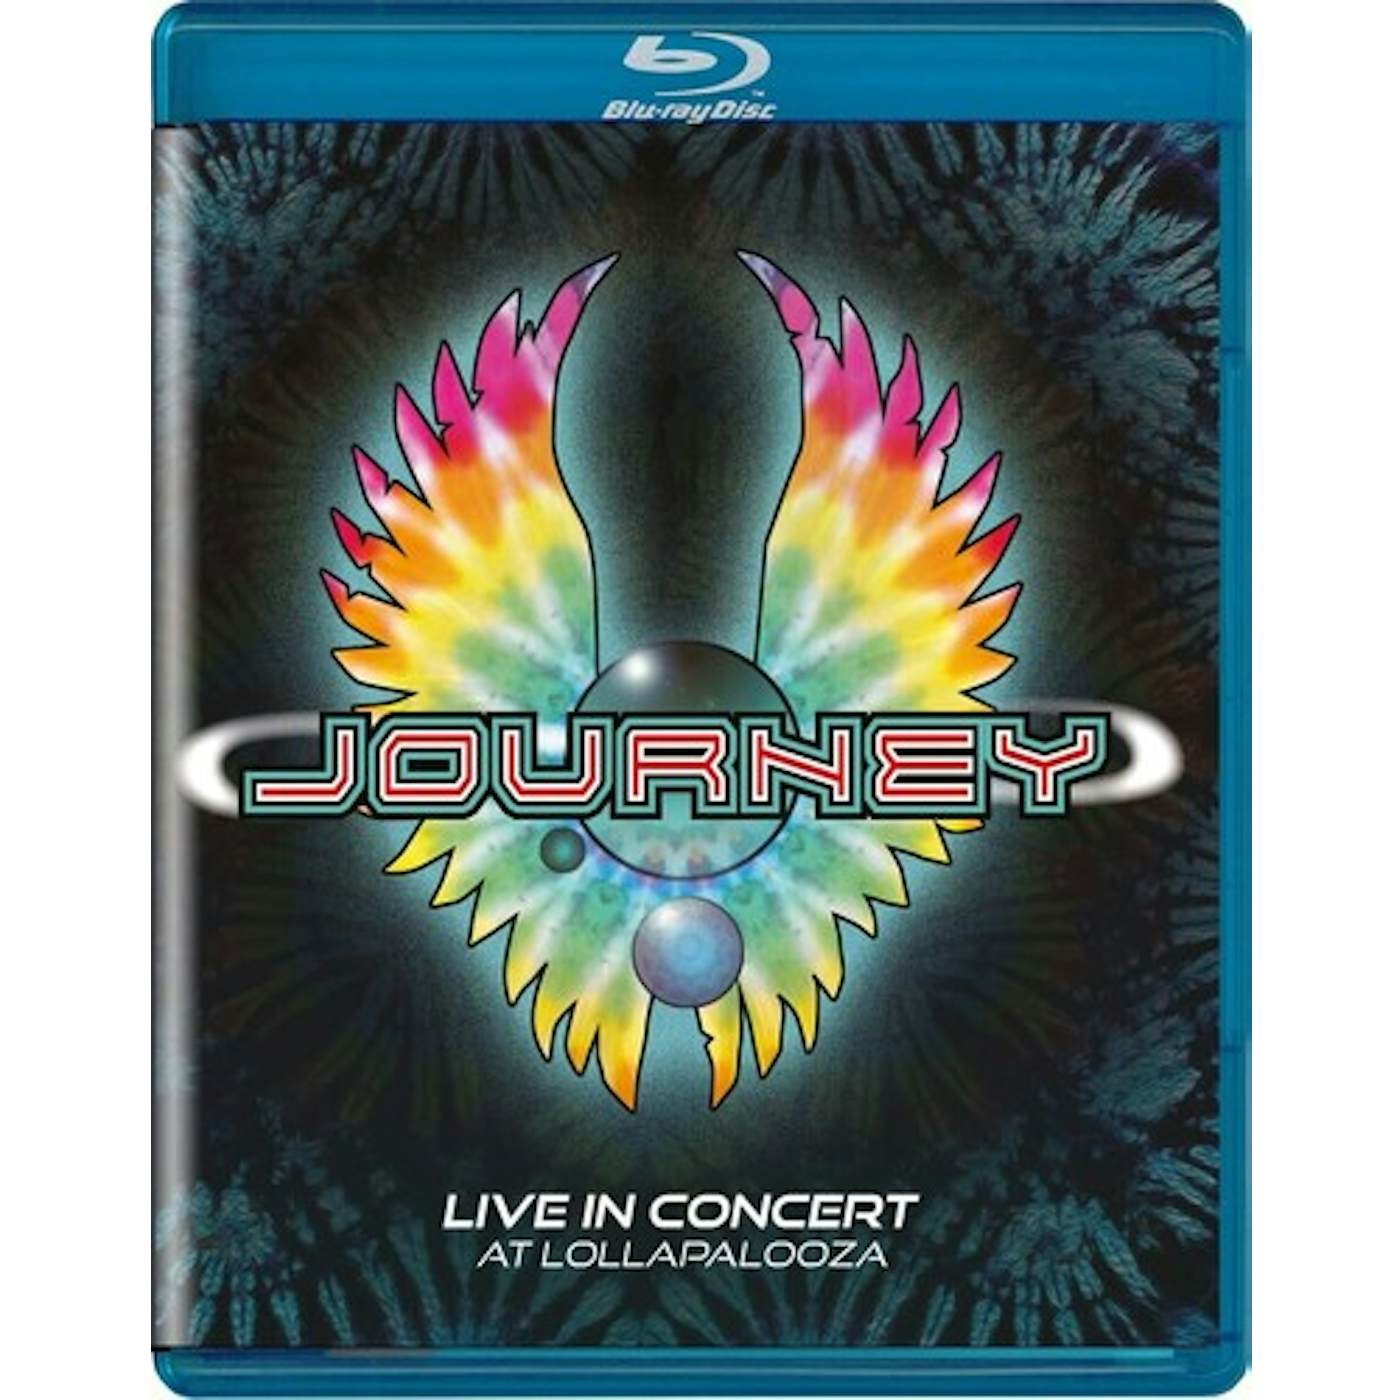 Journey LIVE IN CONCERT AT LOLLAPALOOZA Blu-ray